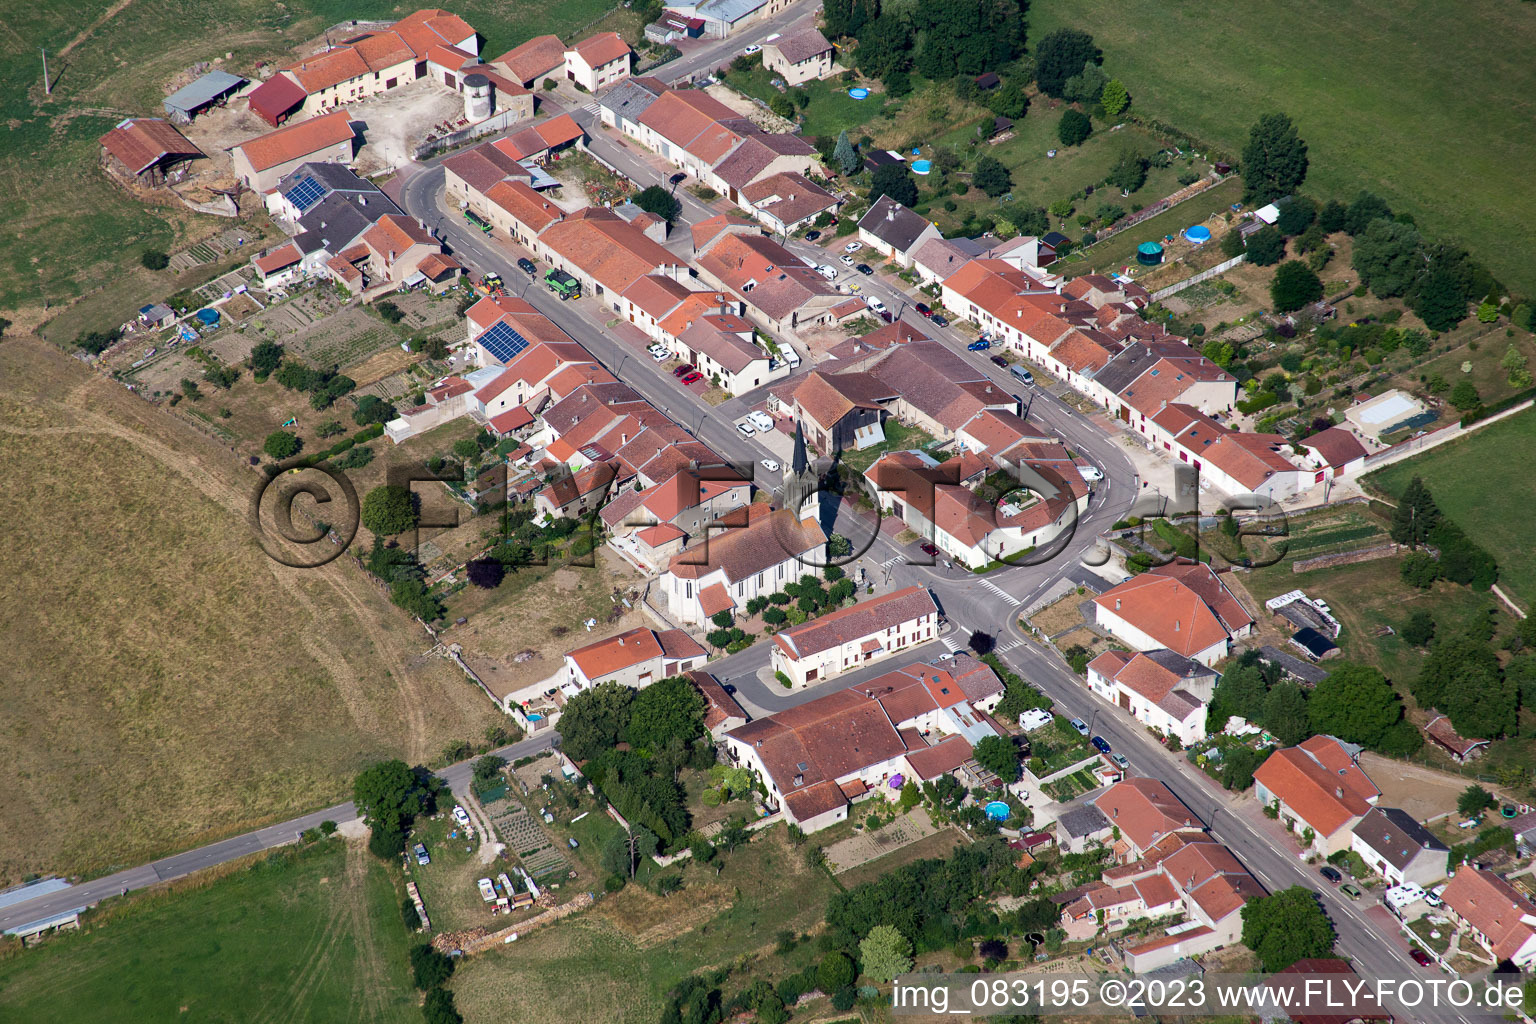 Aerial view of Buissoncourt in the state Meurthe et Moselle, France